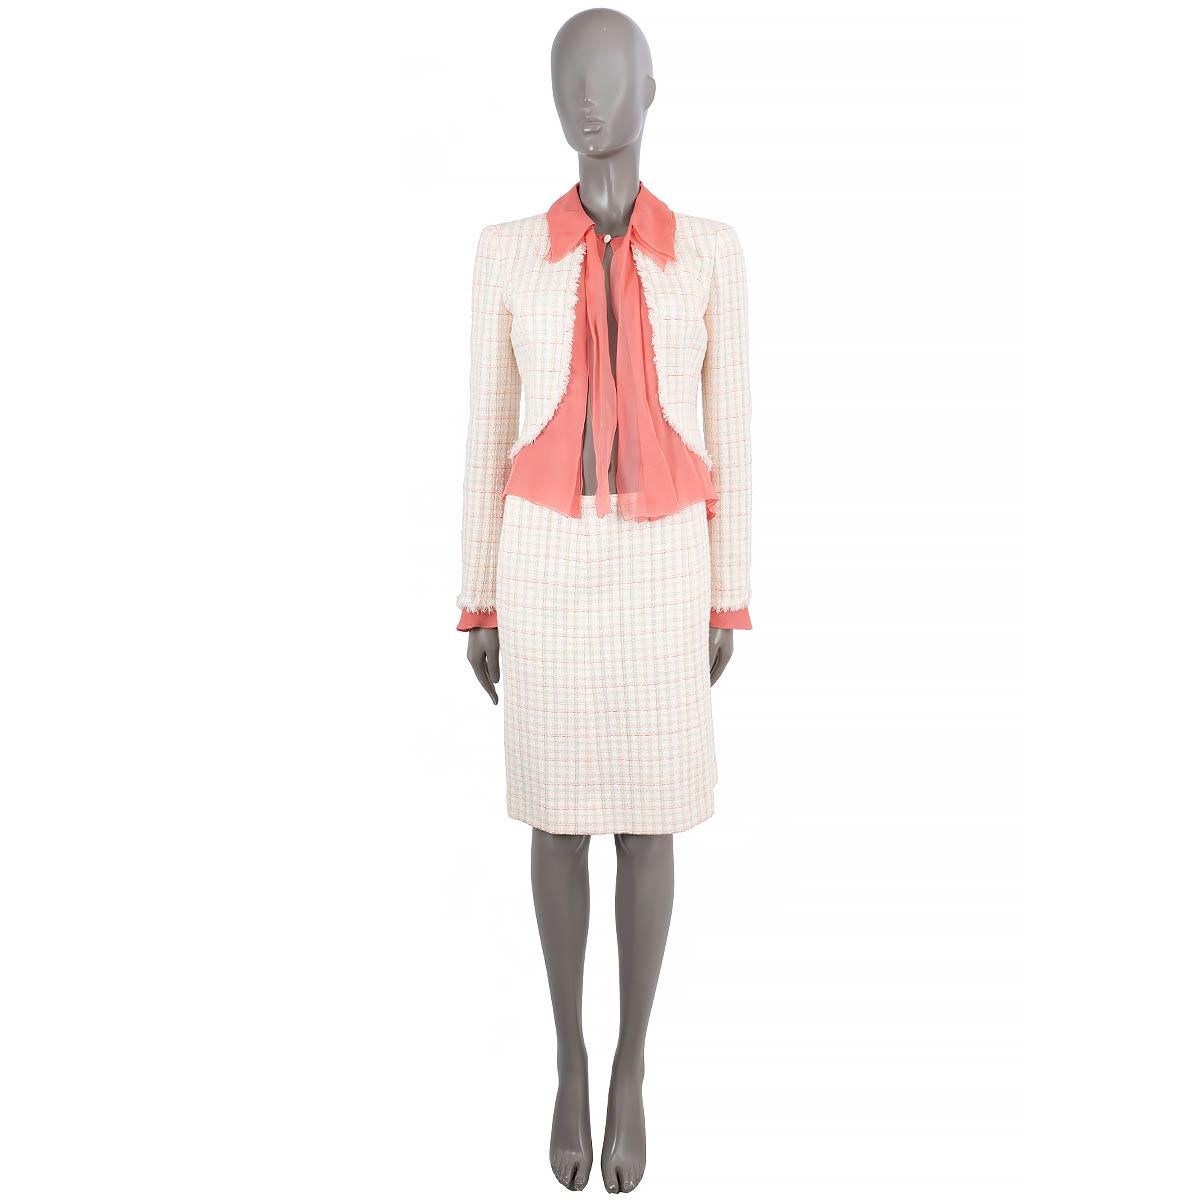 CHANEL ivory & coral wool blend 2004 04C PUSSY BOW SILK & TWEED Jacket 38 S For Sale 8